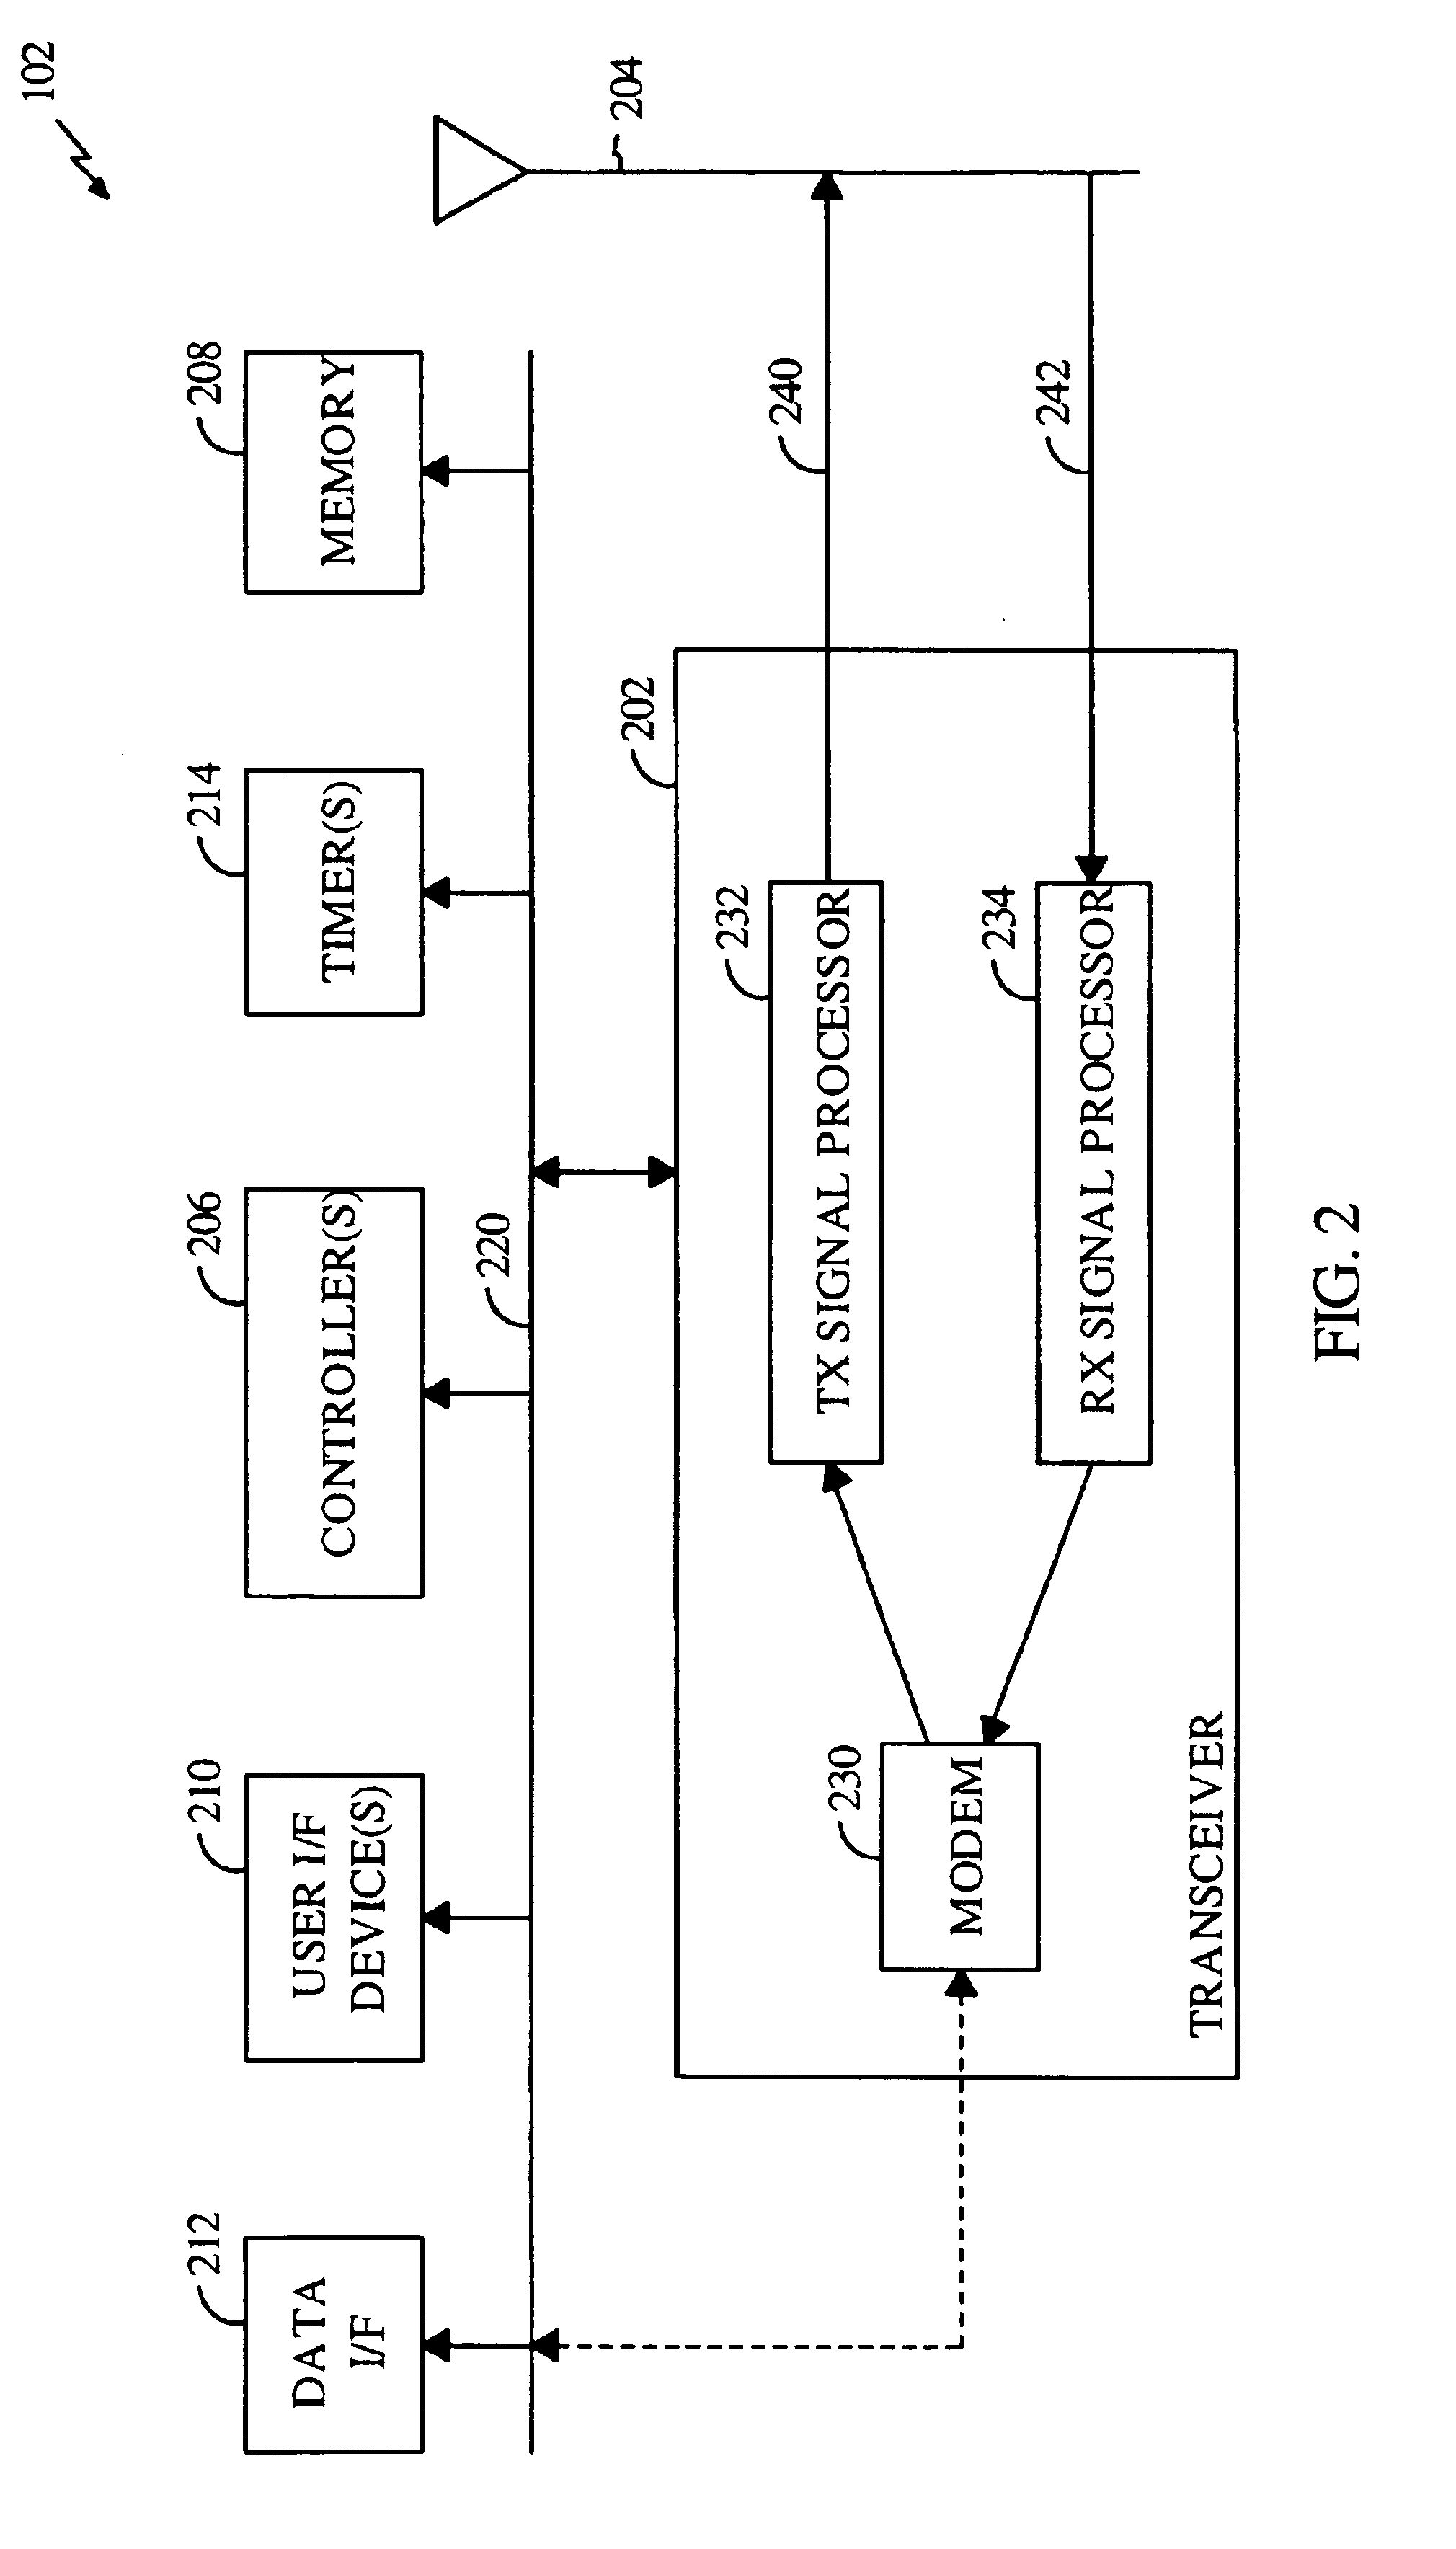 Wireless communication device operable on different types of communication networks